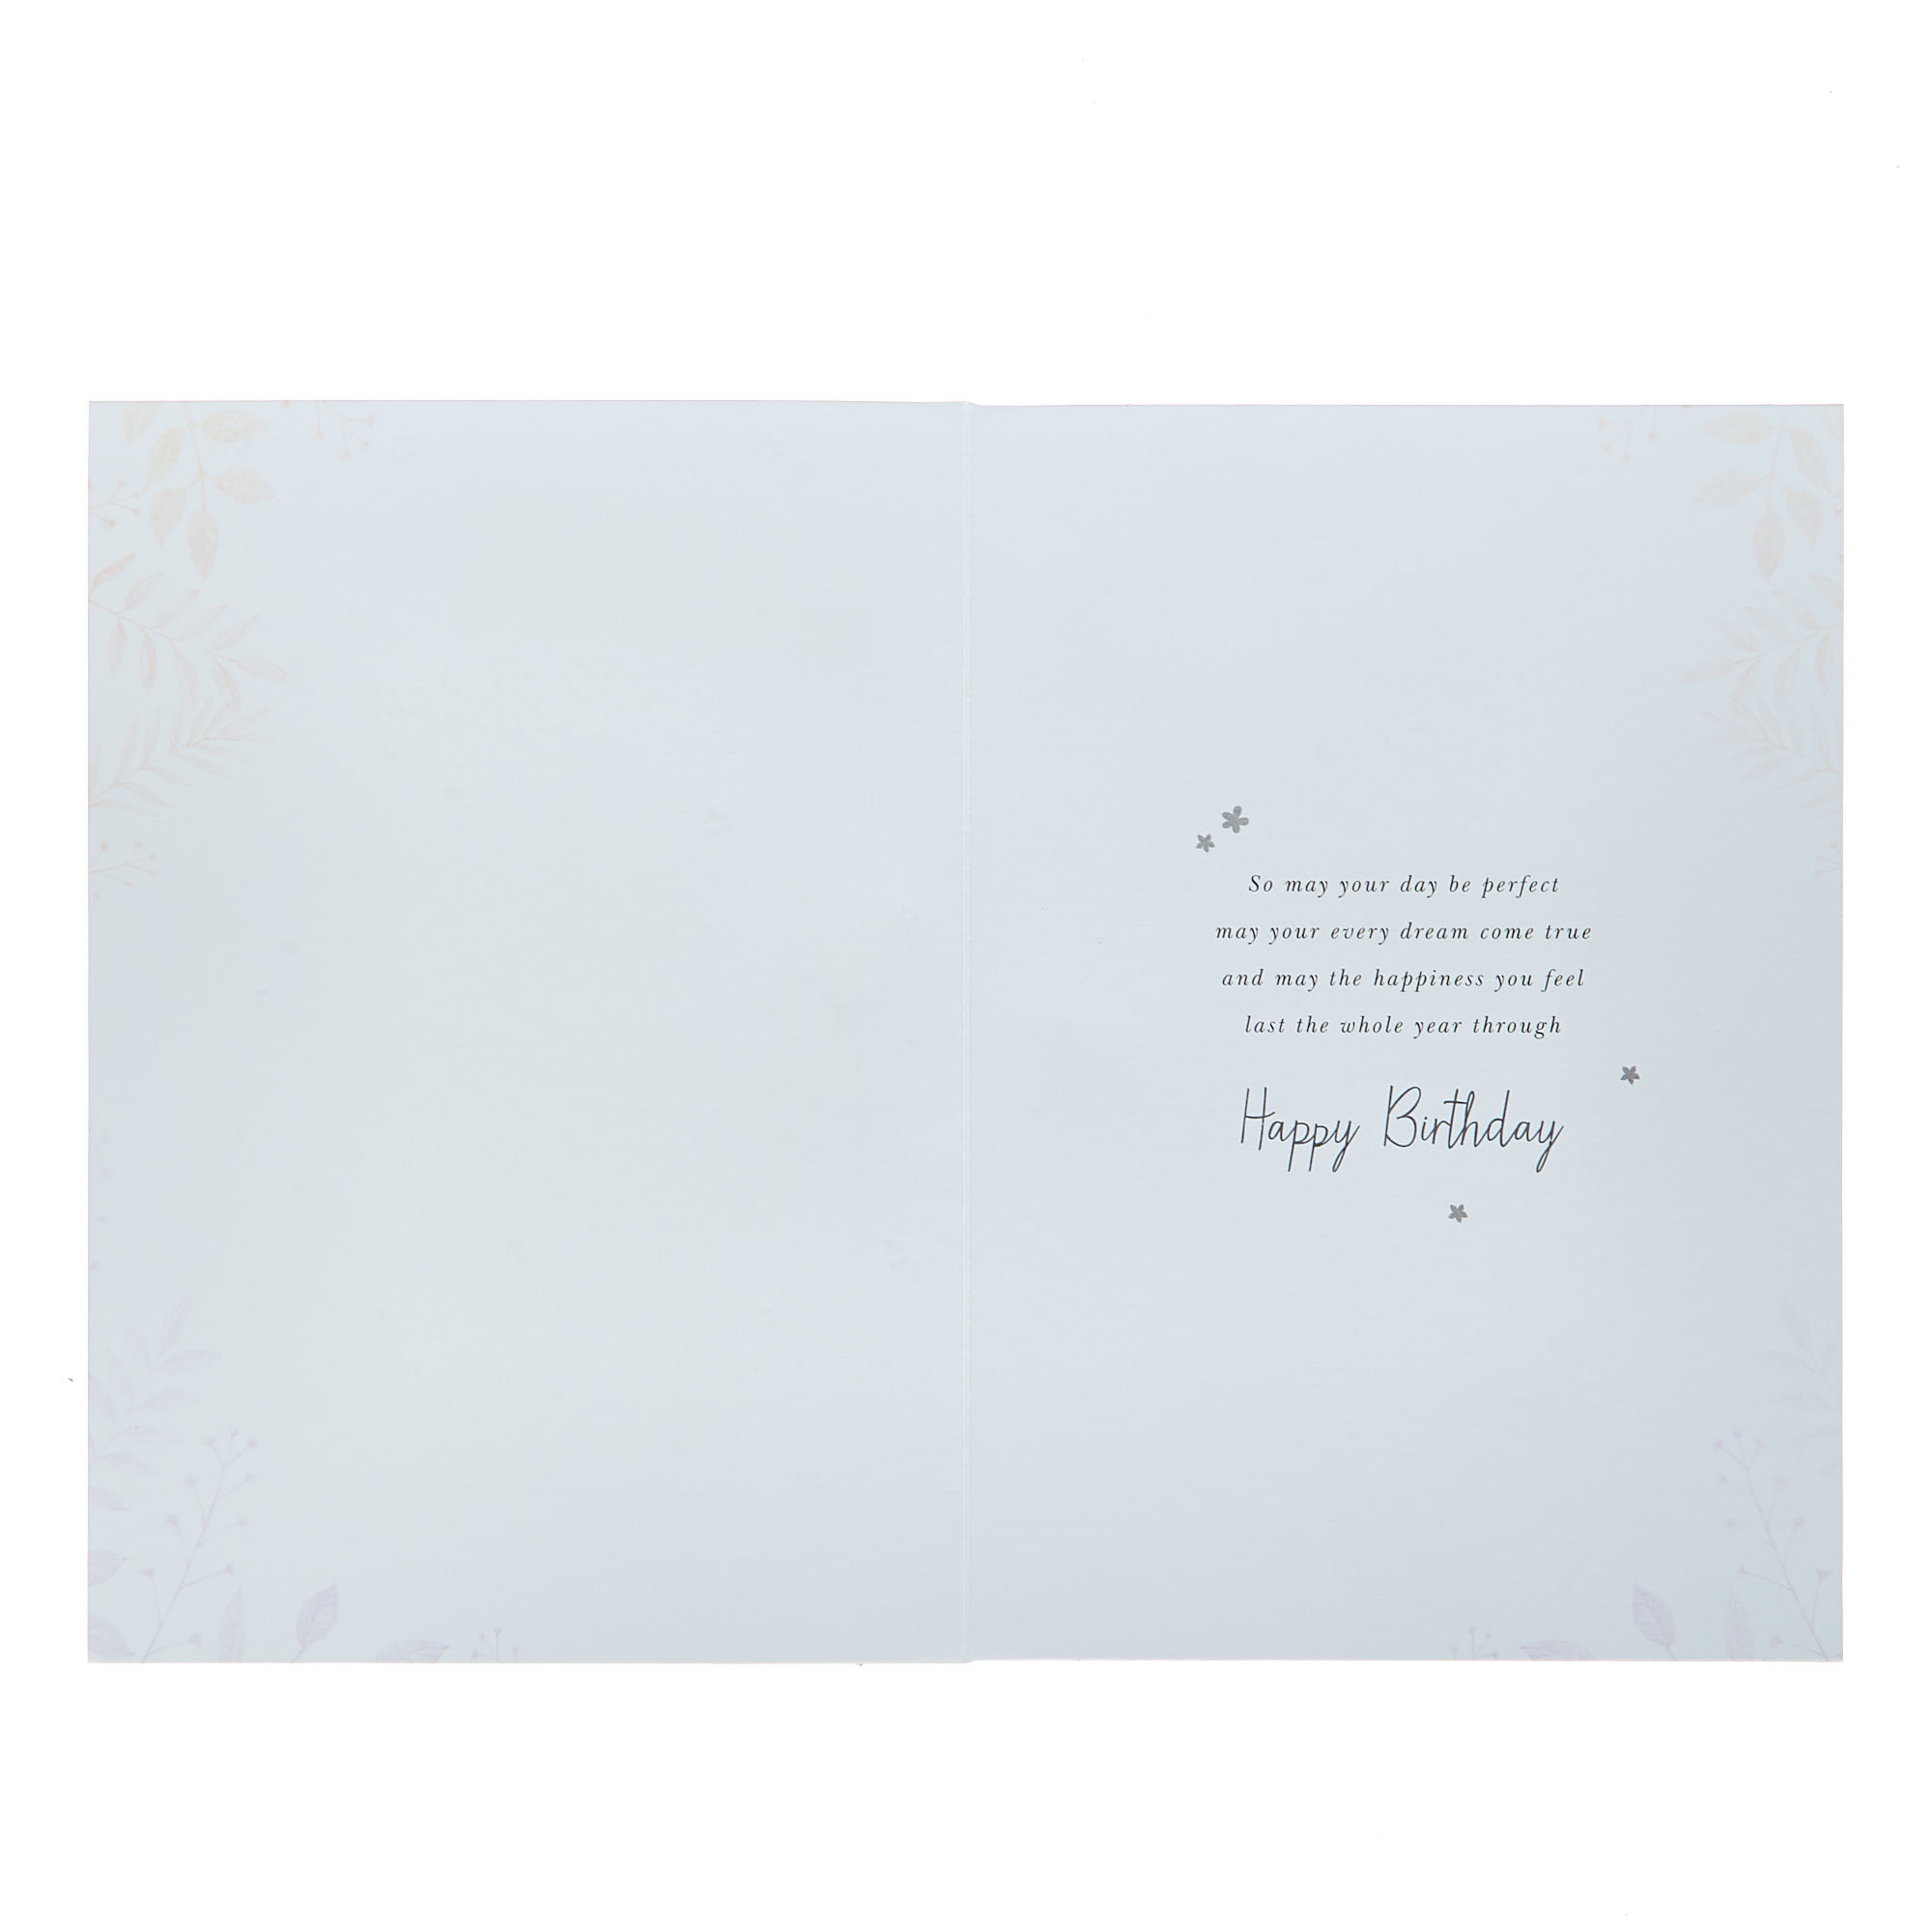 Birthday Card - Especially For You On Your Birthday